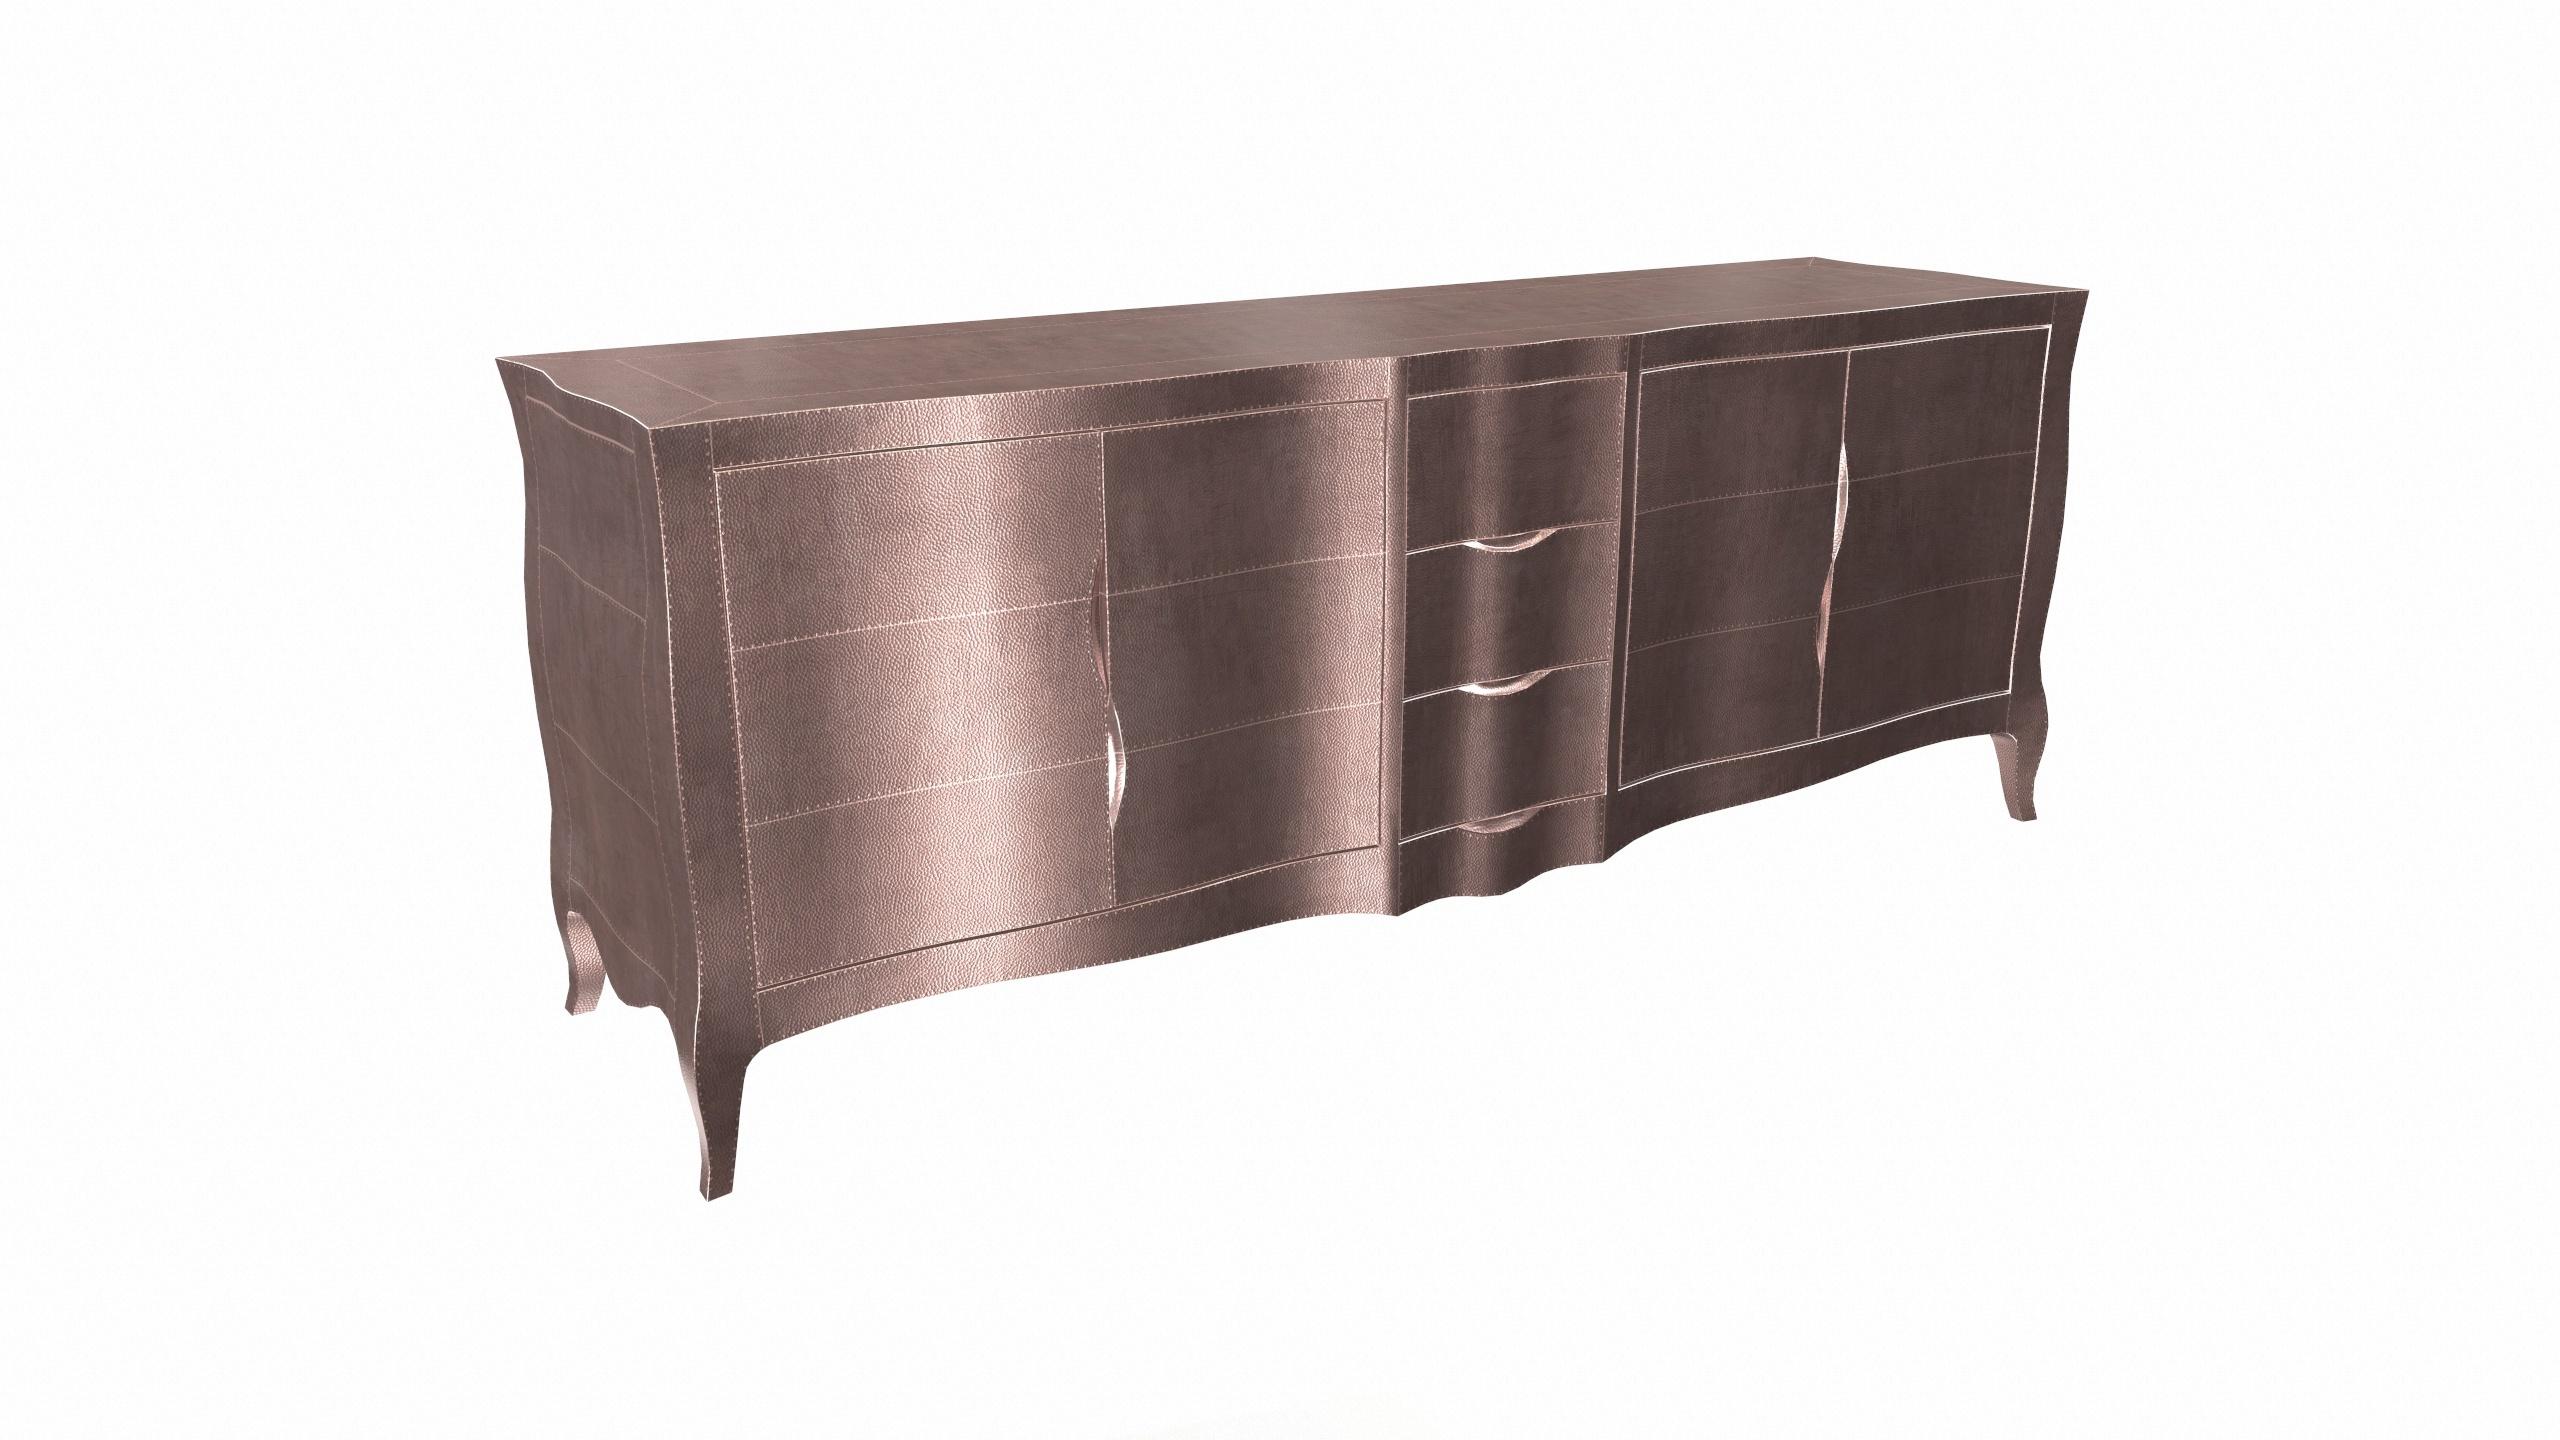 Contemporary Louise Credenza Art Deco Cabinets in Mid. Hammered Copper by Paul Mathieu For Sale